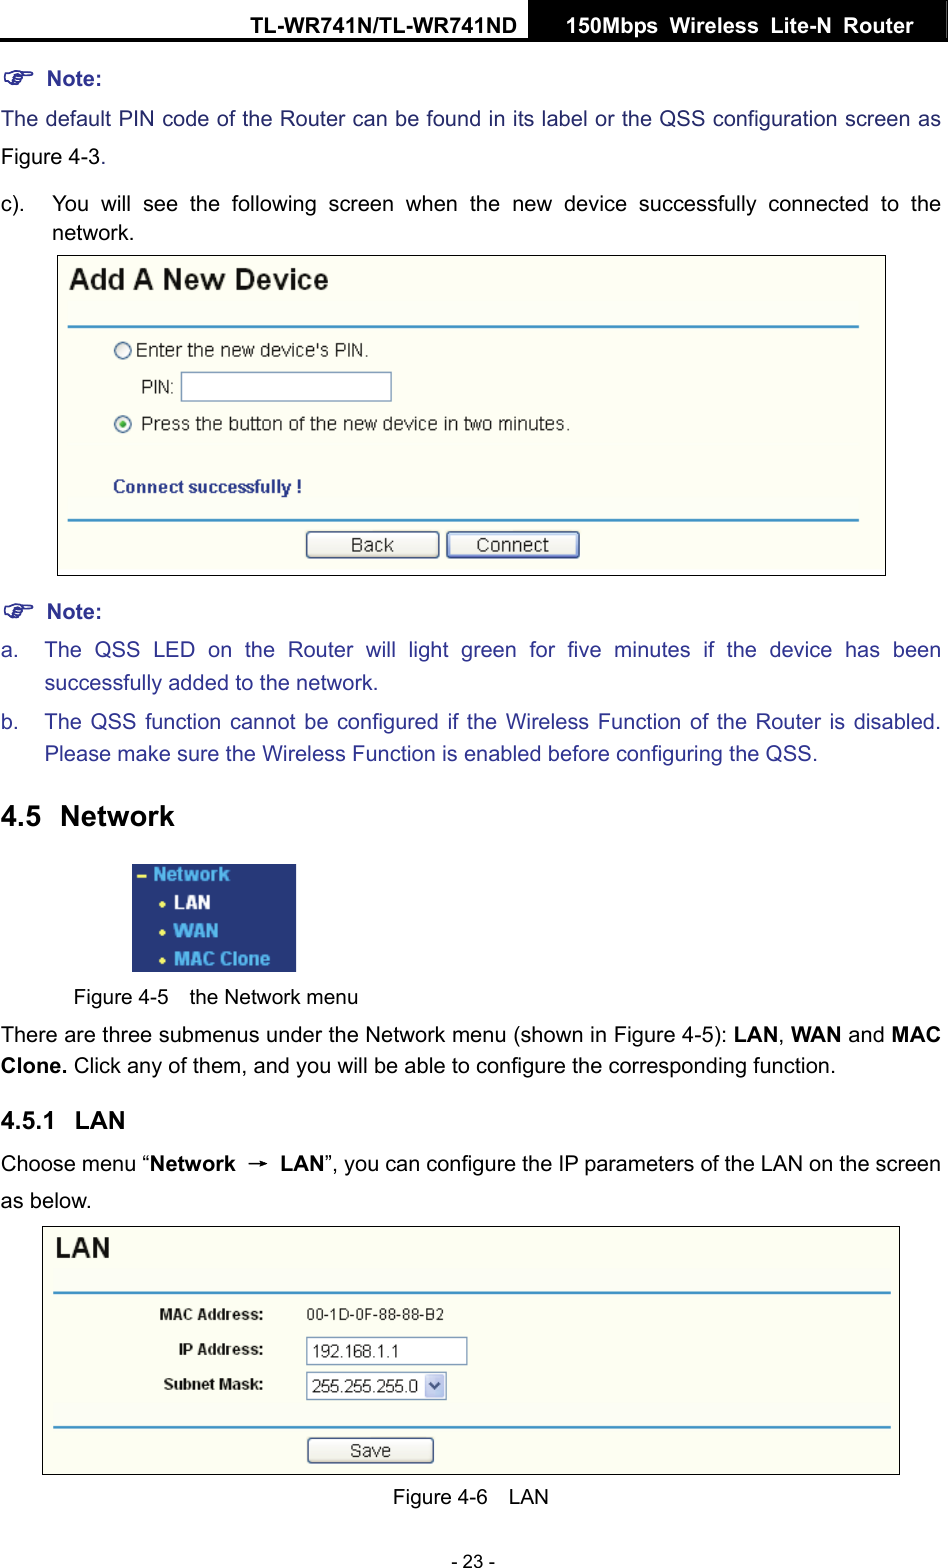 TL-WR741N/TL-WR741ND  150Mbps Wireless Lite-N Router   - 23 - ) Note: The default PIN code of the Router can be found in its label or the QSS configuration screen as Figure 4-3. c).  You will see the following screen when the new device successfully connected to the network.  ) Note: a.  The QSS LED on the Router will light green for five minutes if the device has been successfully added to the network. b.  The QSS function cannot be configured if the Wireless Function of the Router is disabled. Please make sure the Wireless Function is enabled before configuring the QSS. 4.5  Network  Figure 4-5  the Network menu There are three submenus under the Network menu (shown in Figure 4-5): LAN, WAN and MAC Clone. Click any of them, and you will be able to configure the corresponding function.   4.5.1  LAN Choose menu “Network  → LAN”, you can configure the IP parameters of the LAN on the screen as below.  Figure 4-6  LAN 